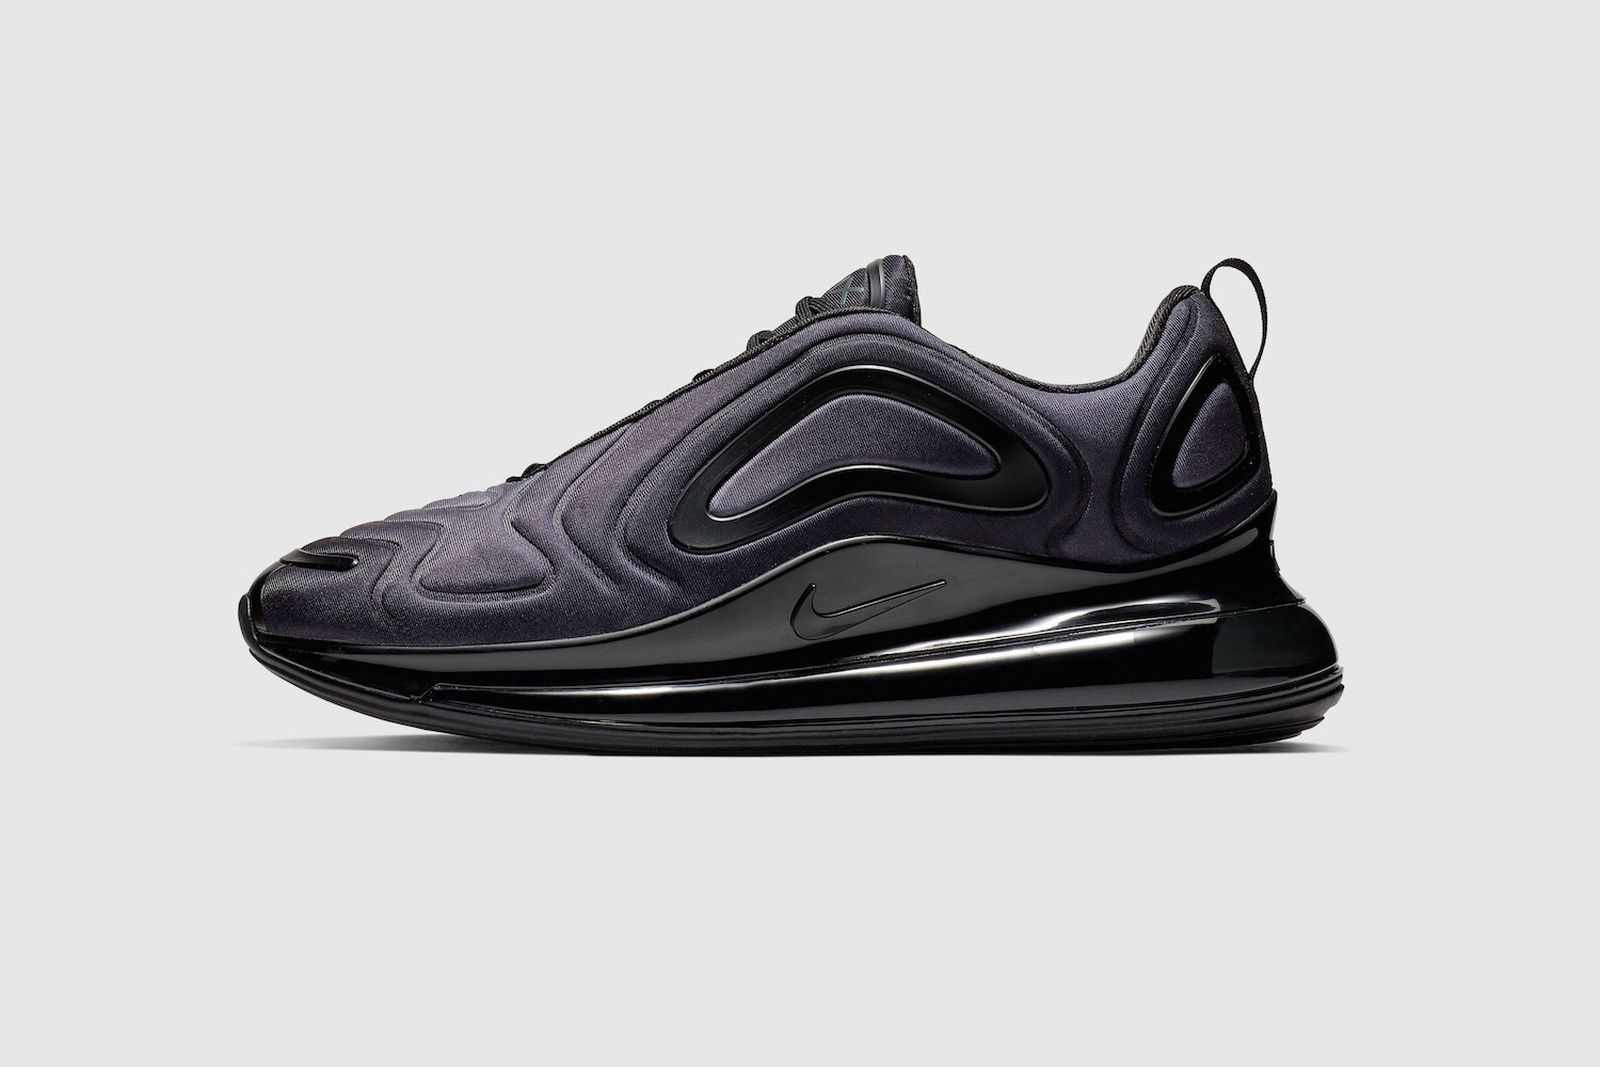 aardappel Terugbetaling noot Nike Air Max 720 February 2019 Colorways: Where to Buy Tomorrow